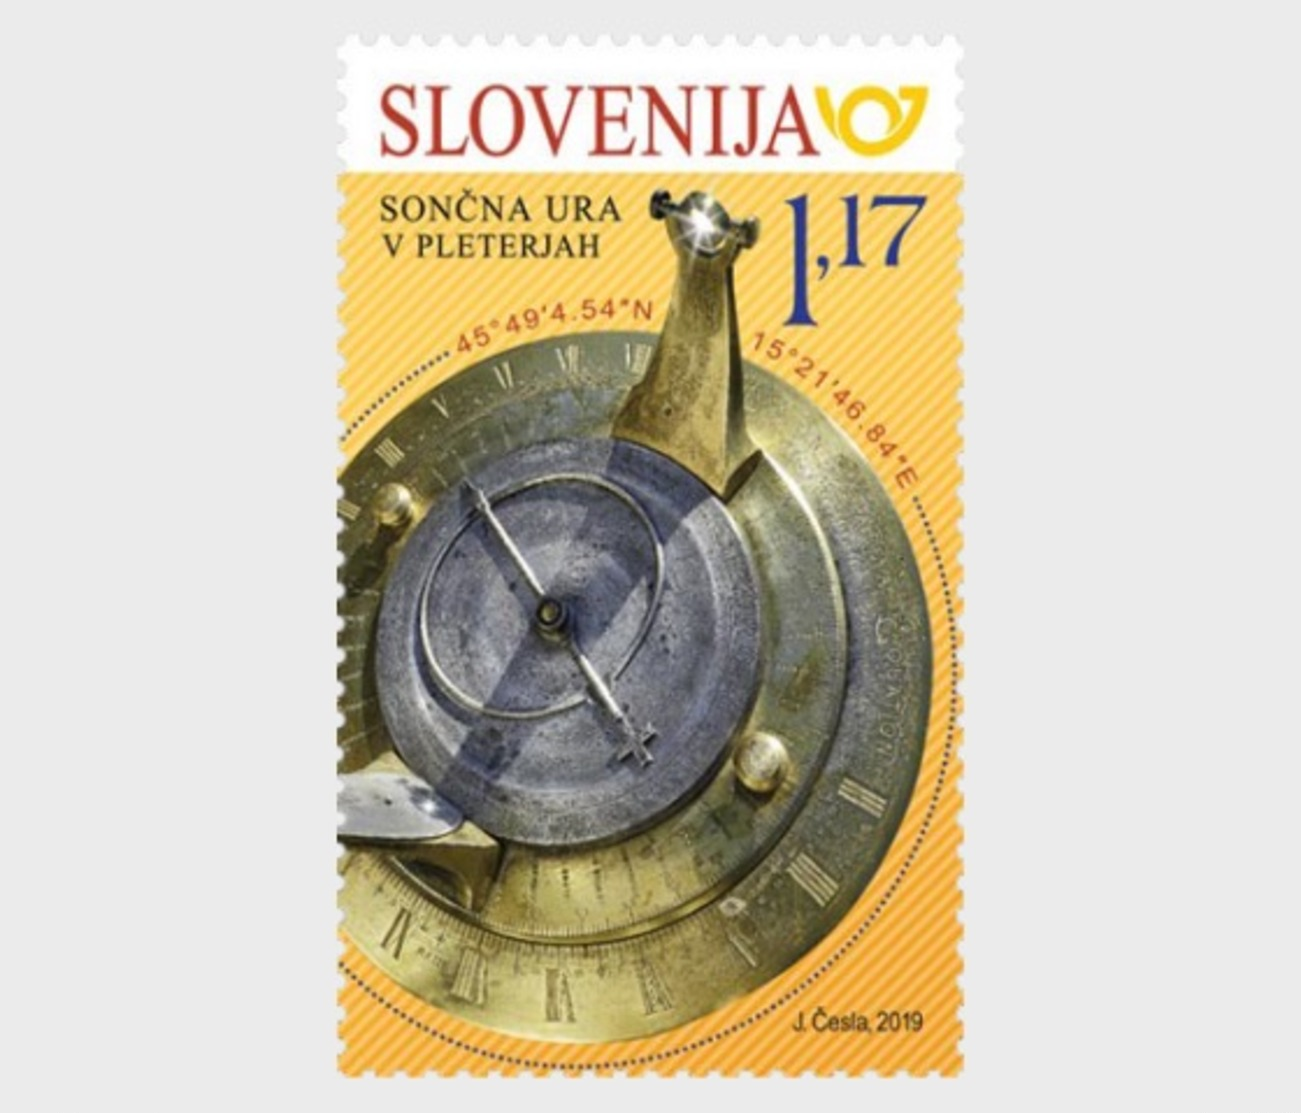 H01 Slovenia 2019 The Anthracothere  Joint Issue Slovenia-Slovakia - Sundial, Astronomical Clock   MNH Postfrisch - Slovenia